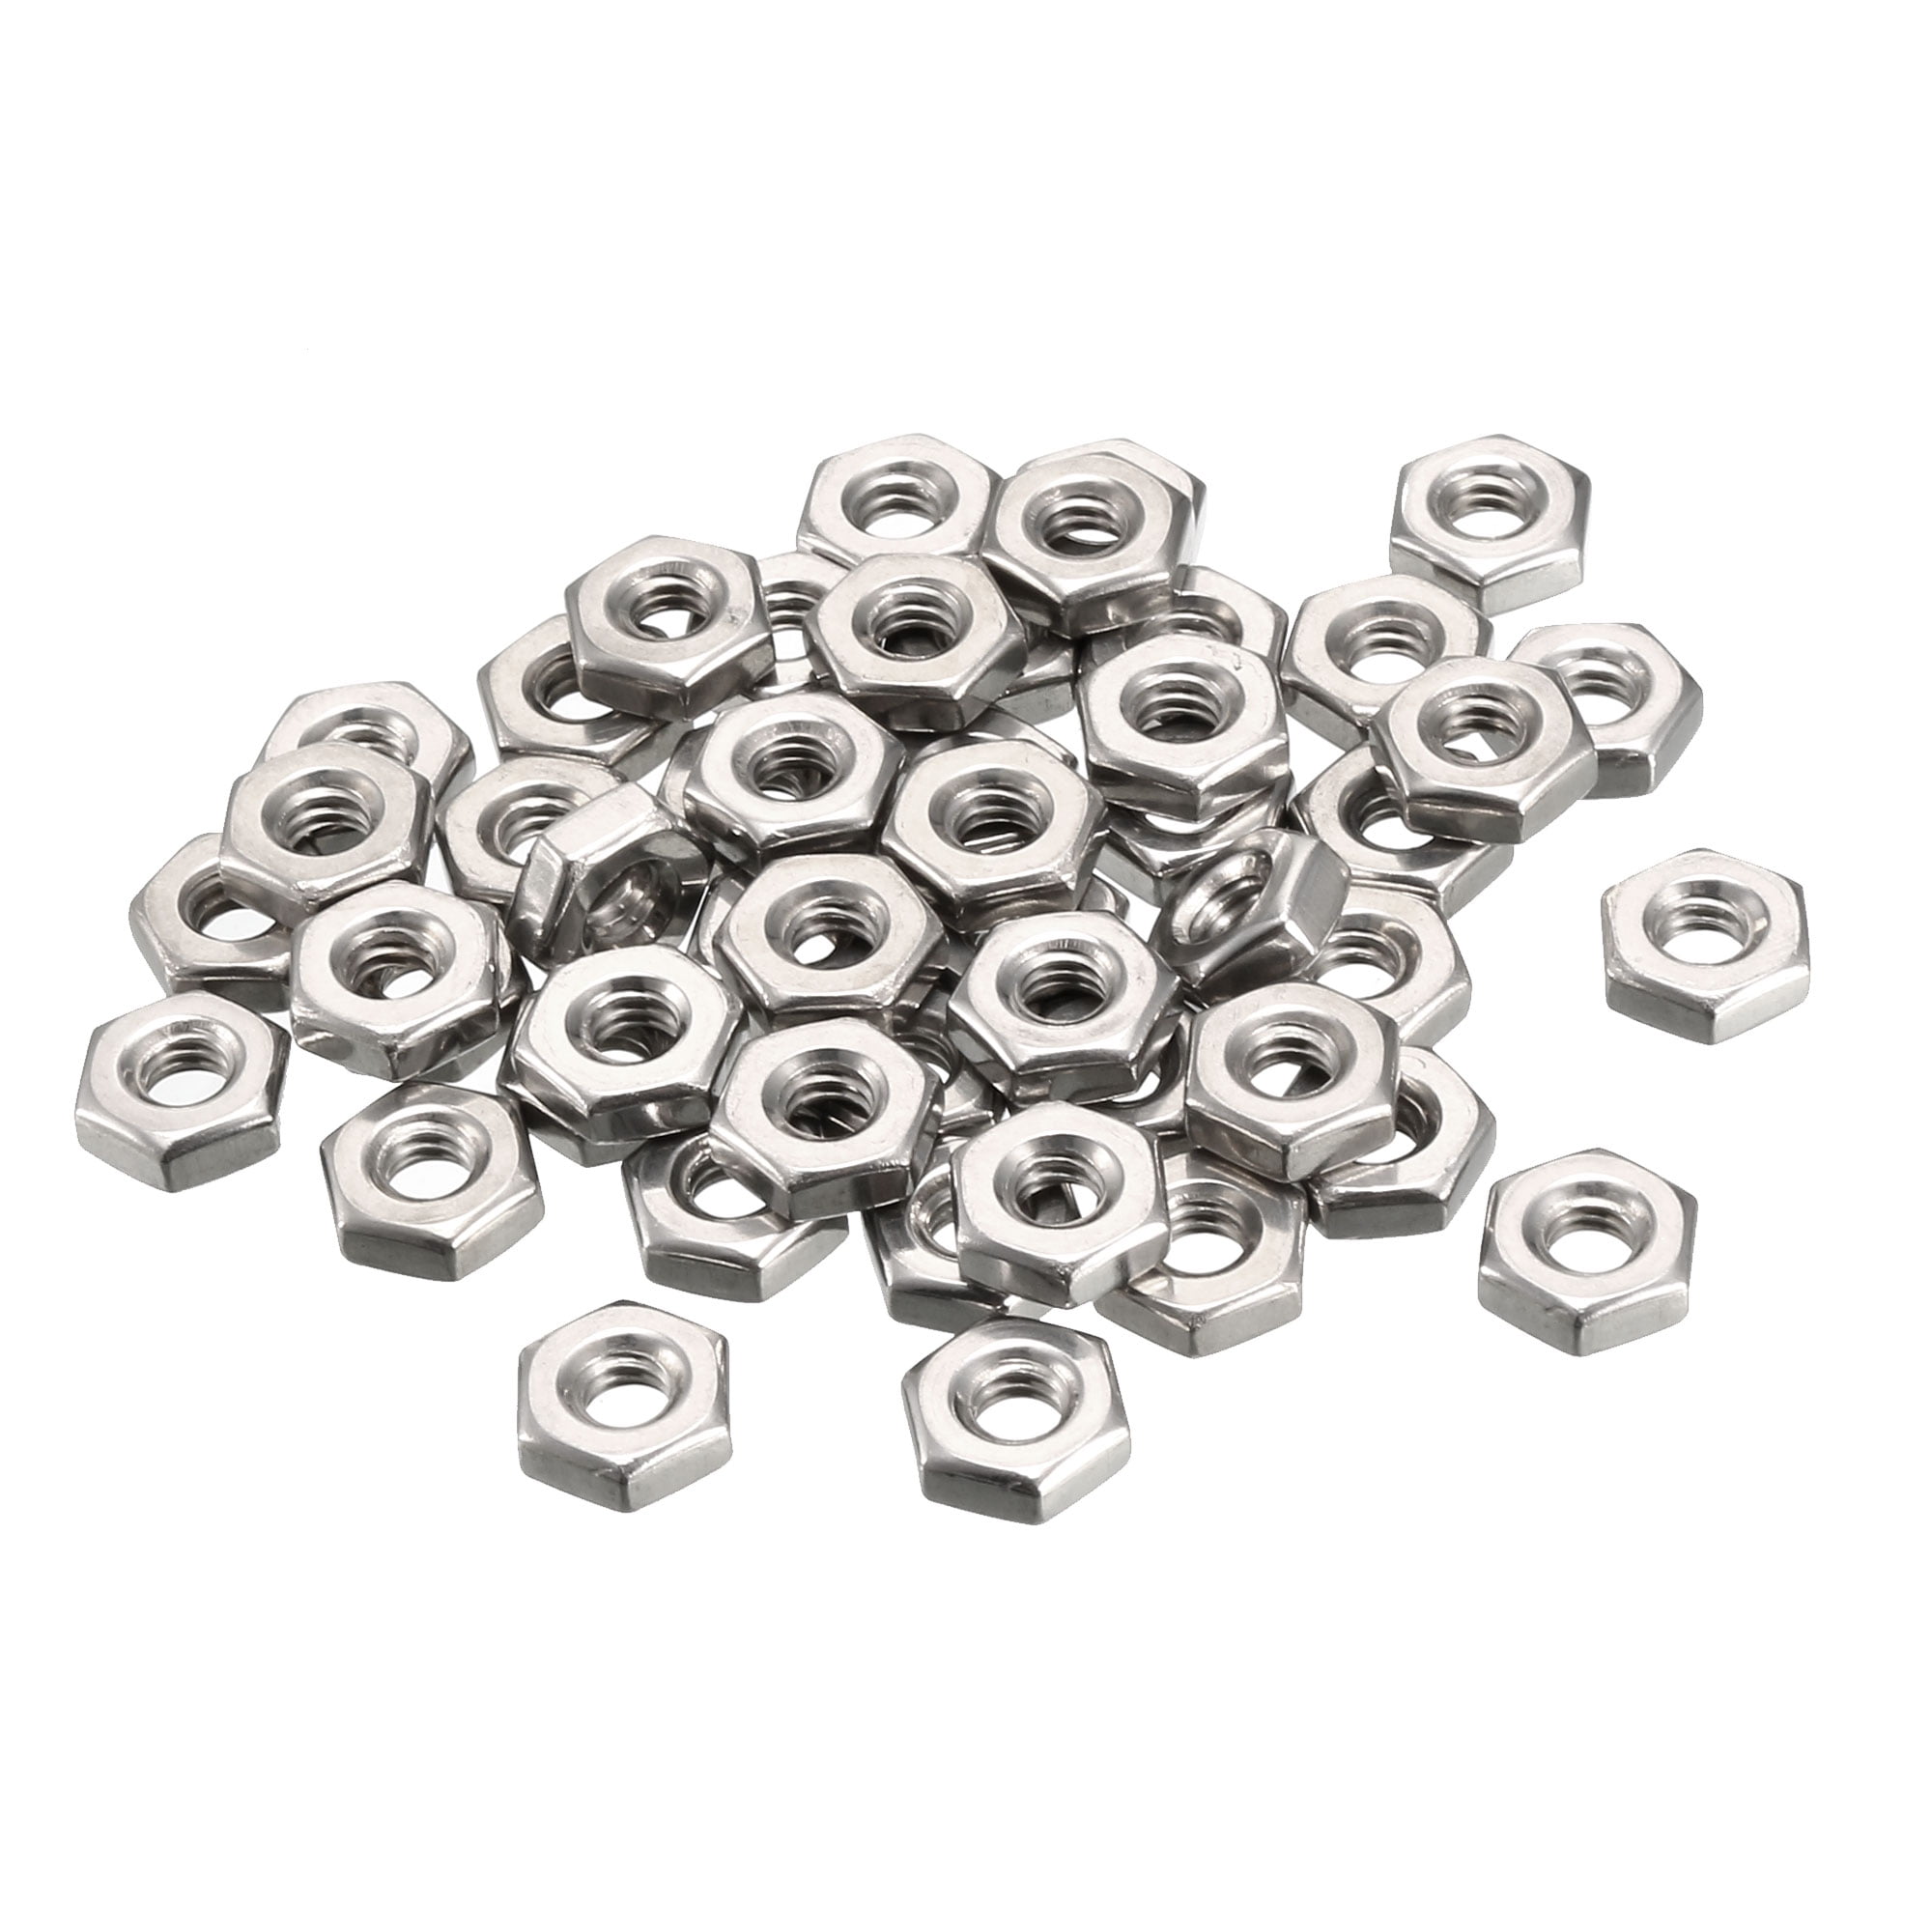 Details about   2-10# 1/4 Inch 304 Stainless Steel Hexagon Hex Nut Silver Tone Thread 50/100pcs 